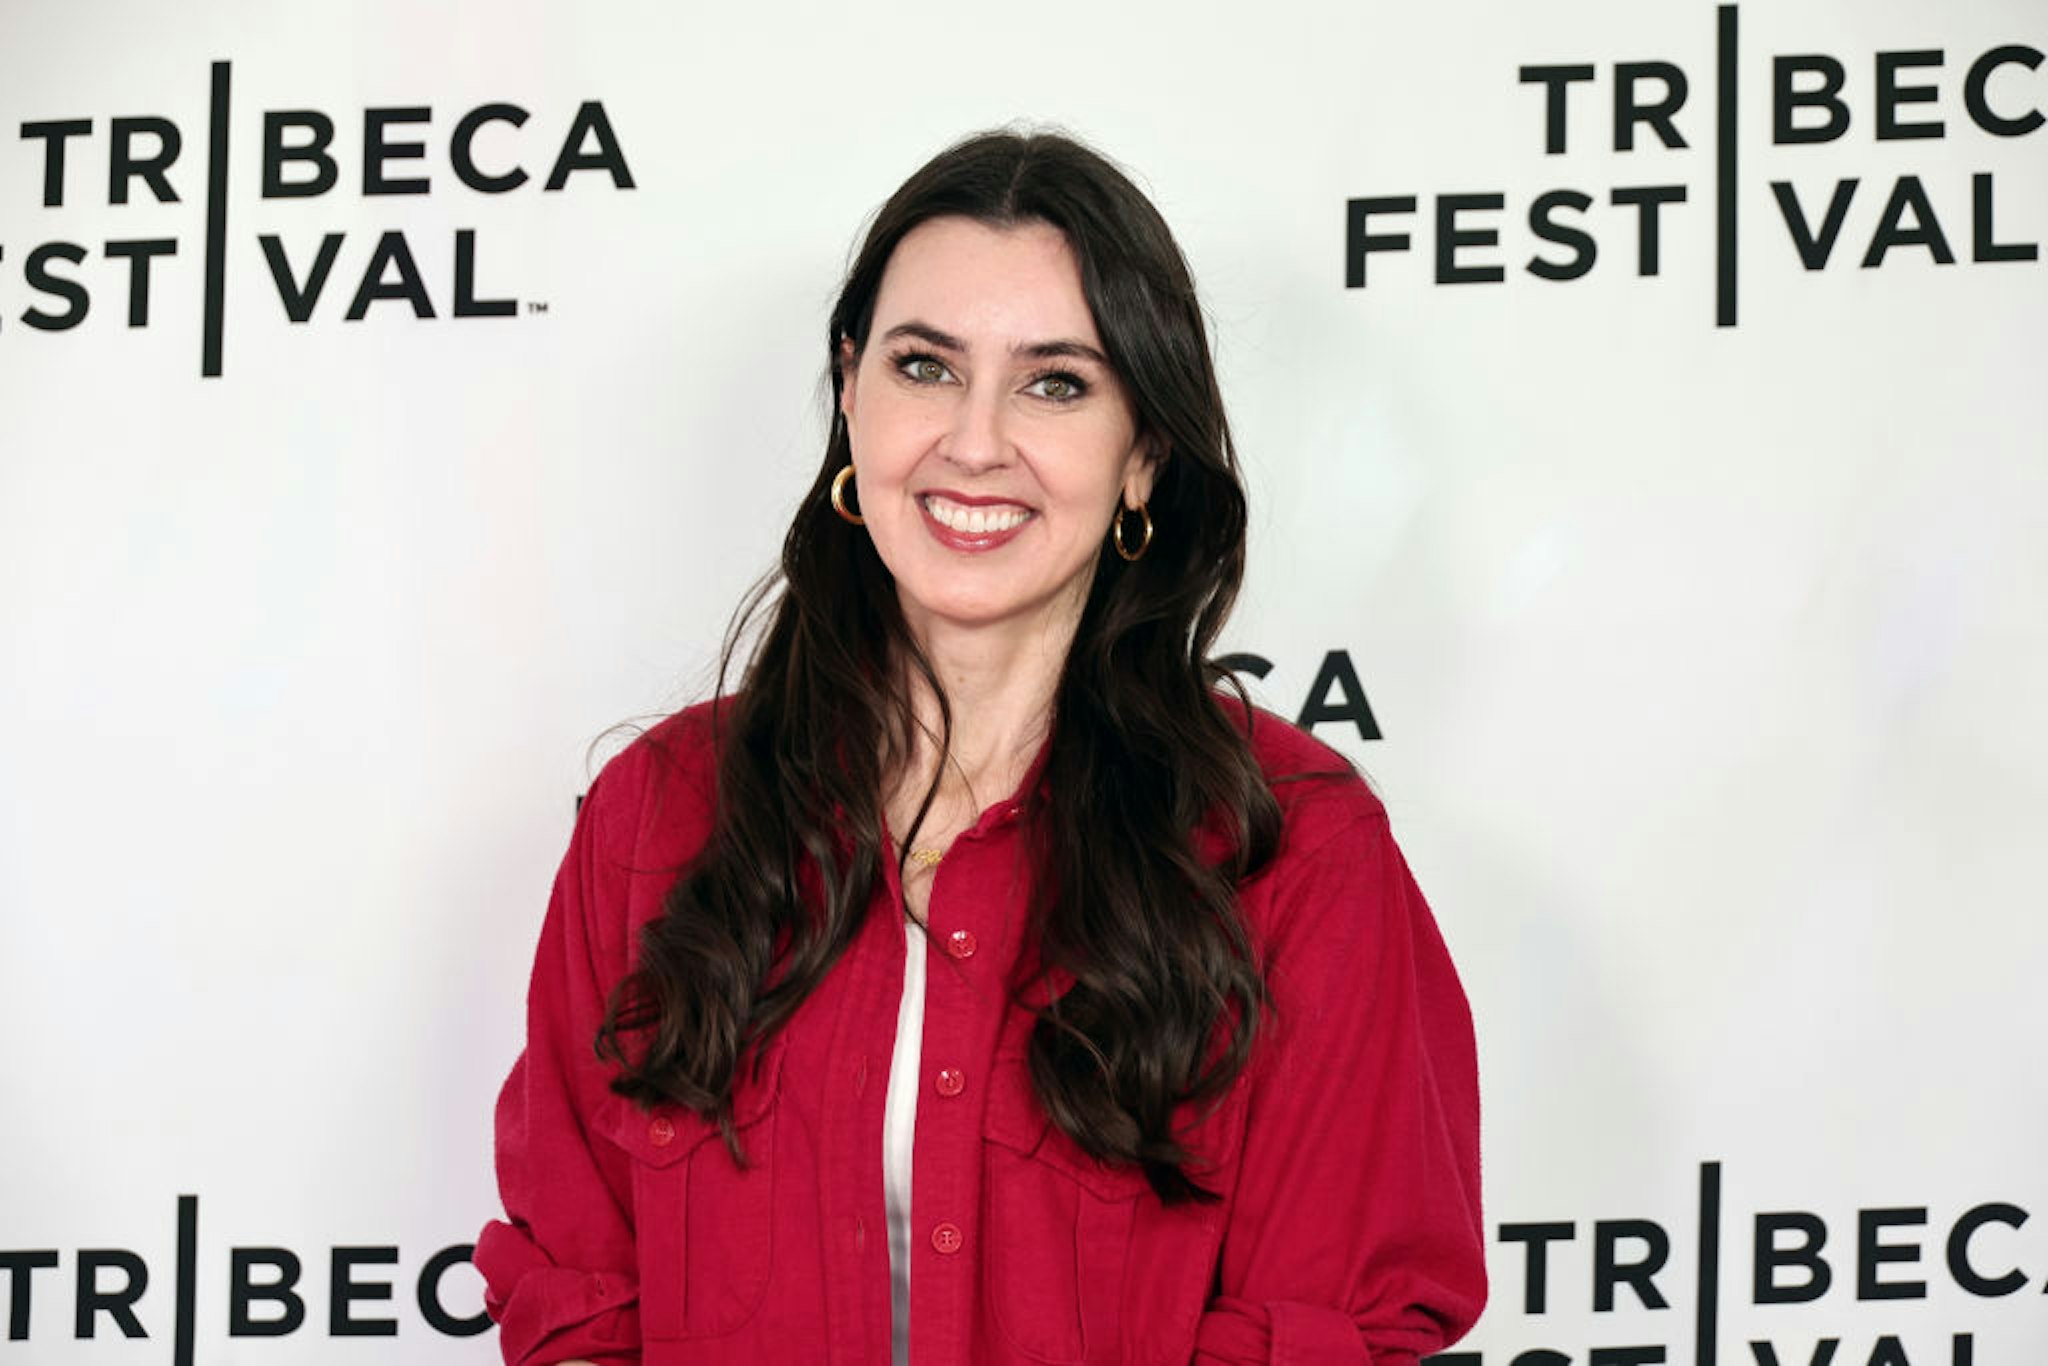 NEW YORK, NEW YORK - JUNE 10: Taylor Lorenz attends the "This Is Not Financial Advice" premiere during the 2023 Tribeca Festival at SVA Theatre on June 10, 2023 in New York City. (Photo by Jamie McCarthy/Getty Images for Tribeca Festival)